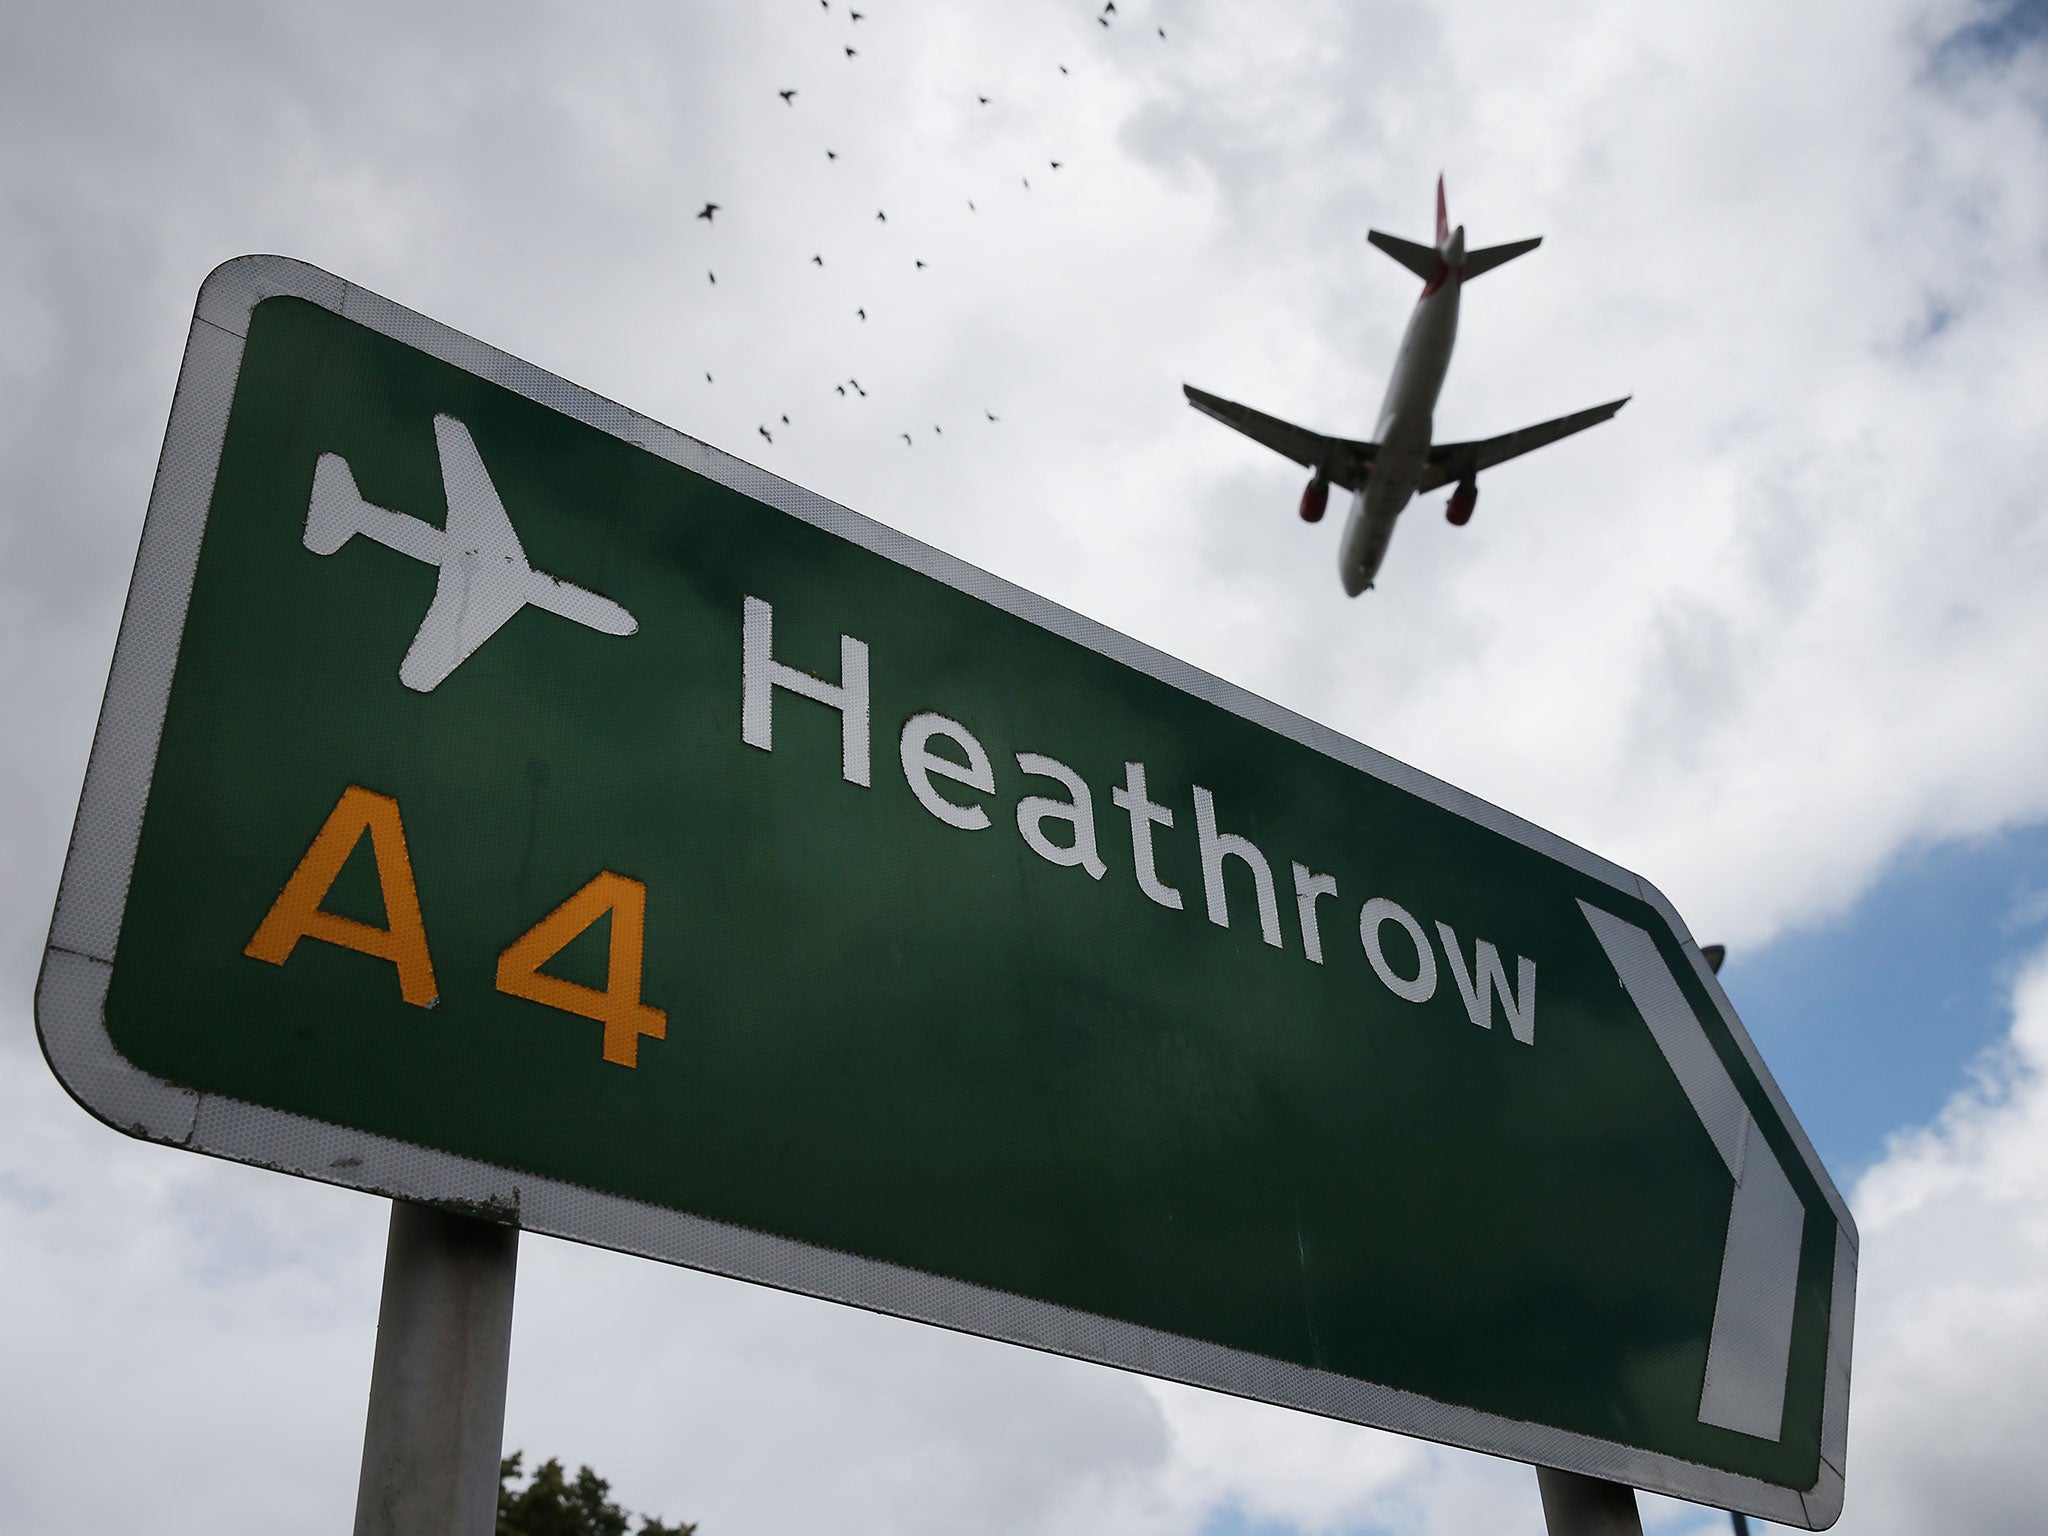 Heathrow's offer includes limits on noise and air pollution